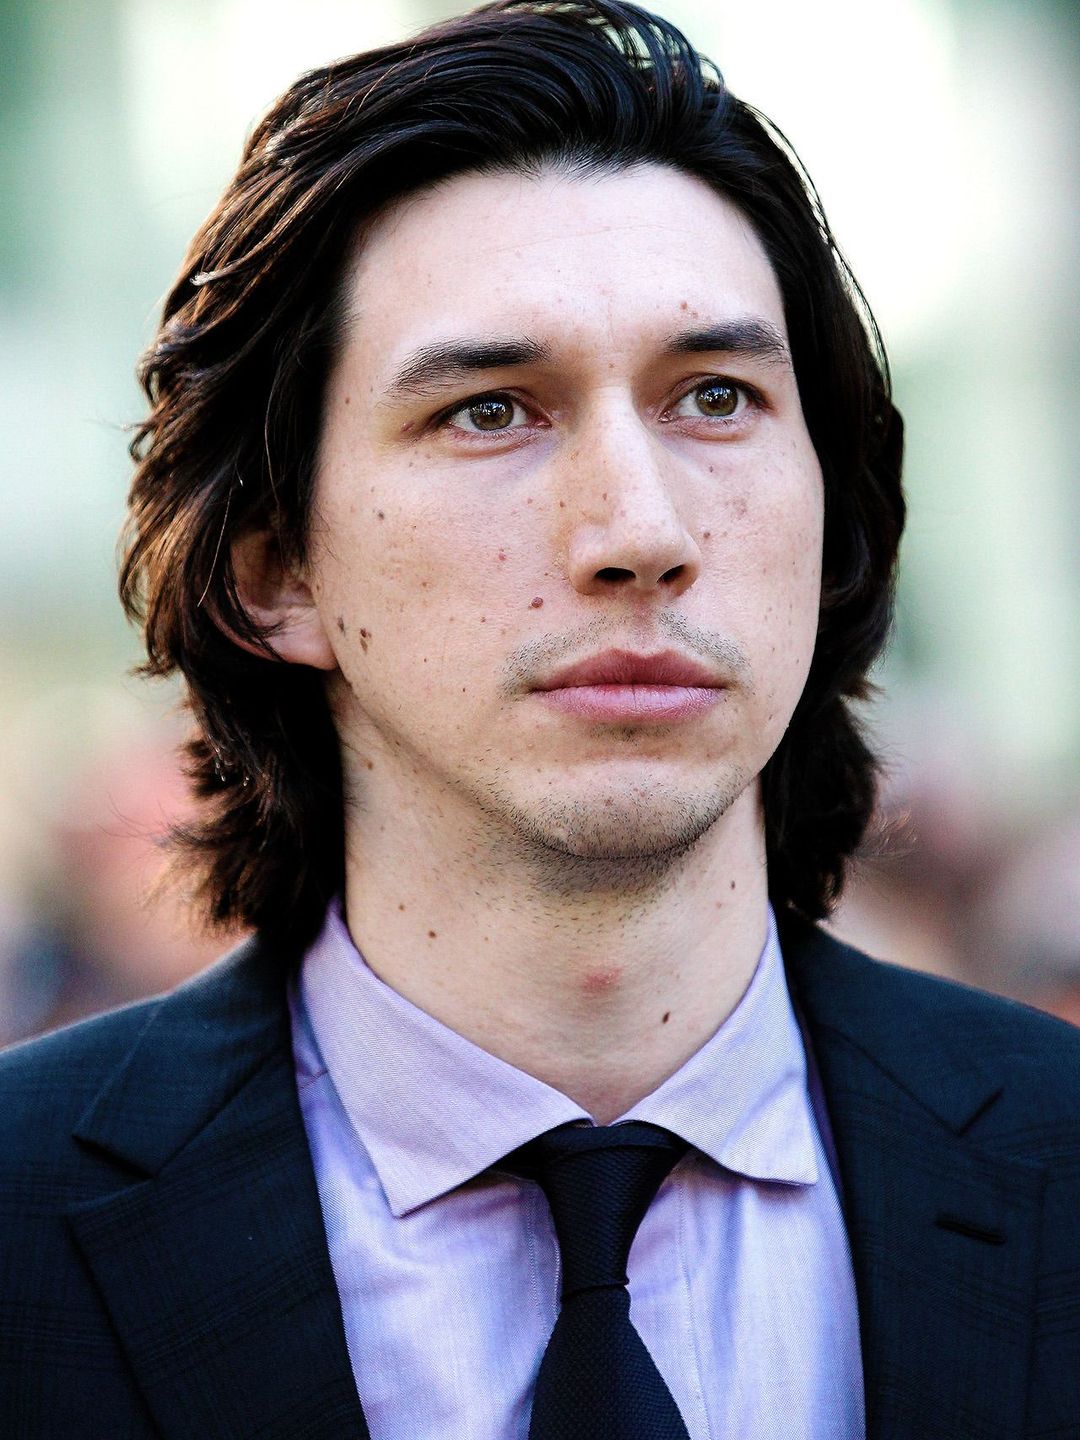 Adam Driver early life